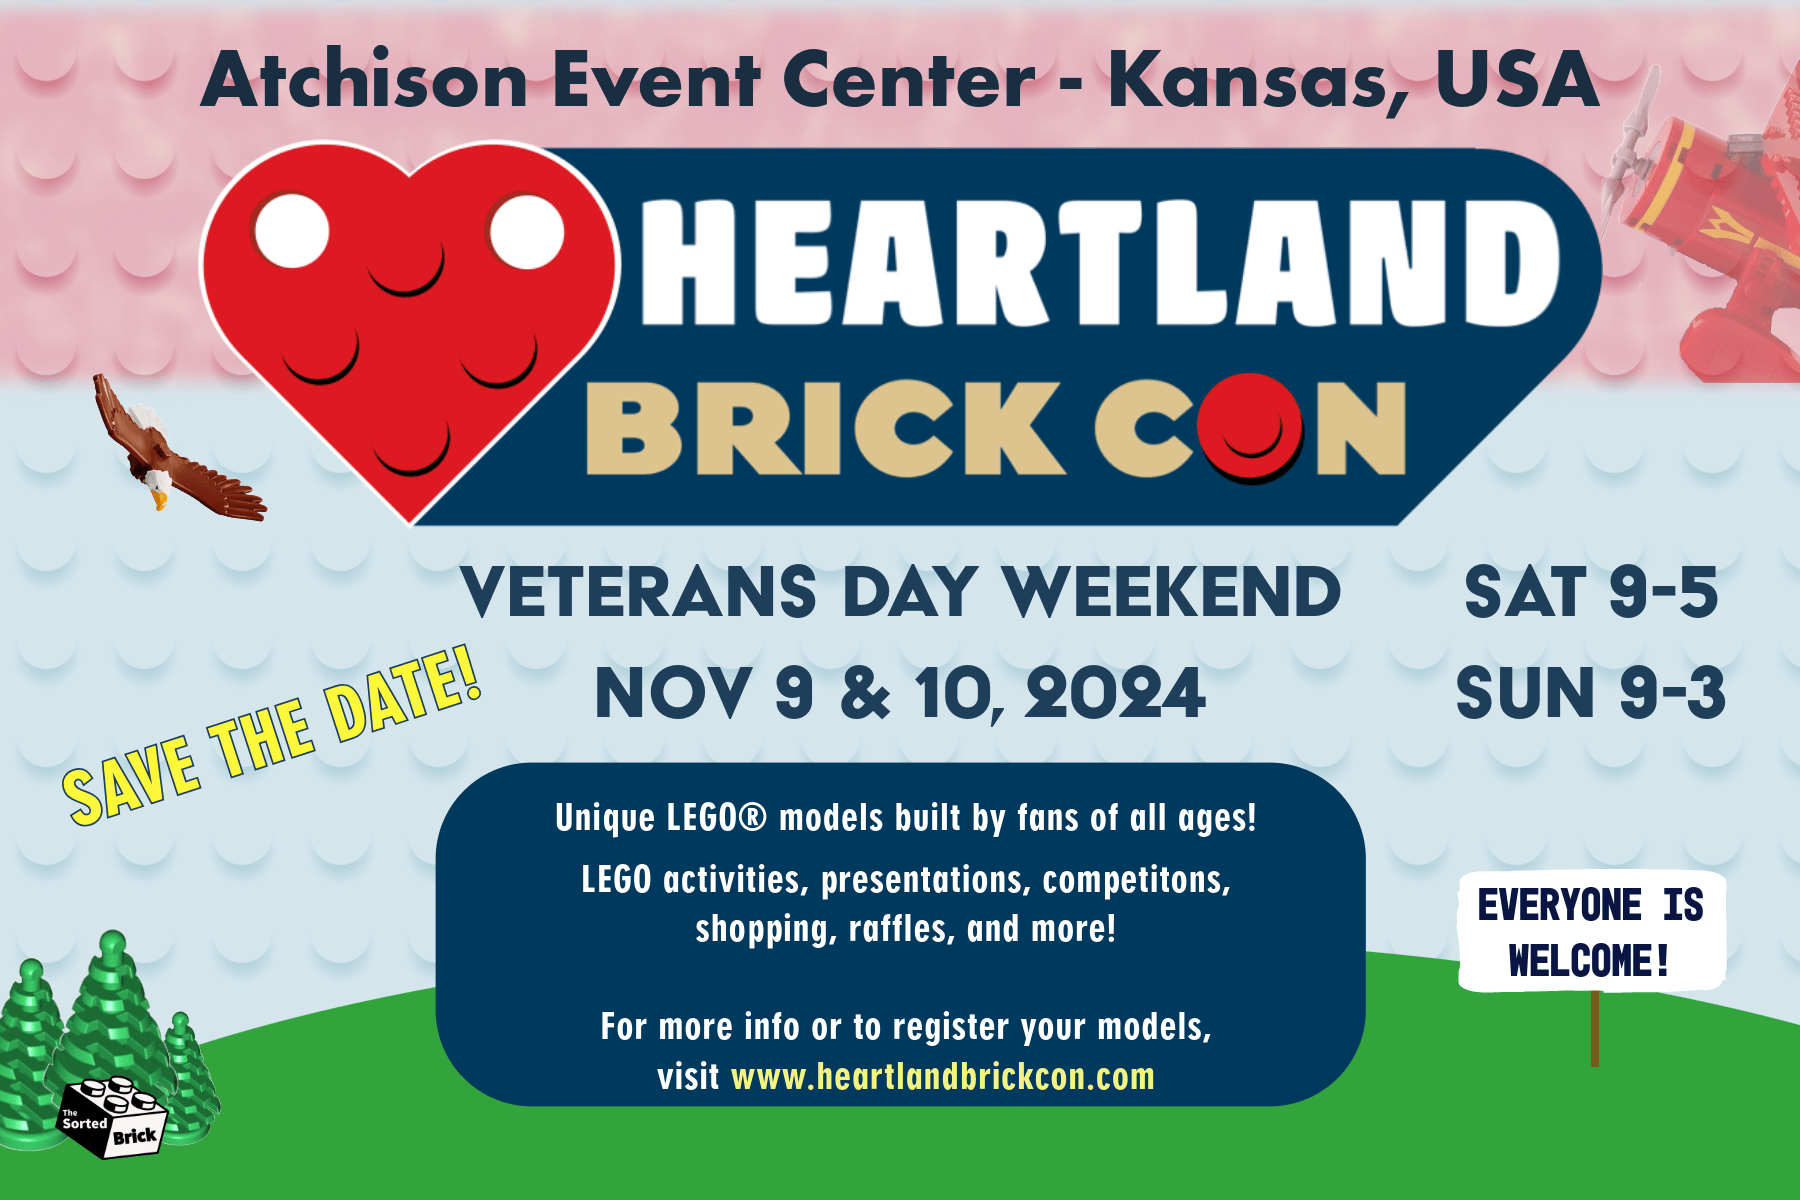 Unique LEGO Models built by fans of all ages! LEGO activities, presentations, competitions, shopping, raffles, and more! Everyone is welcome!